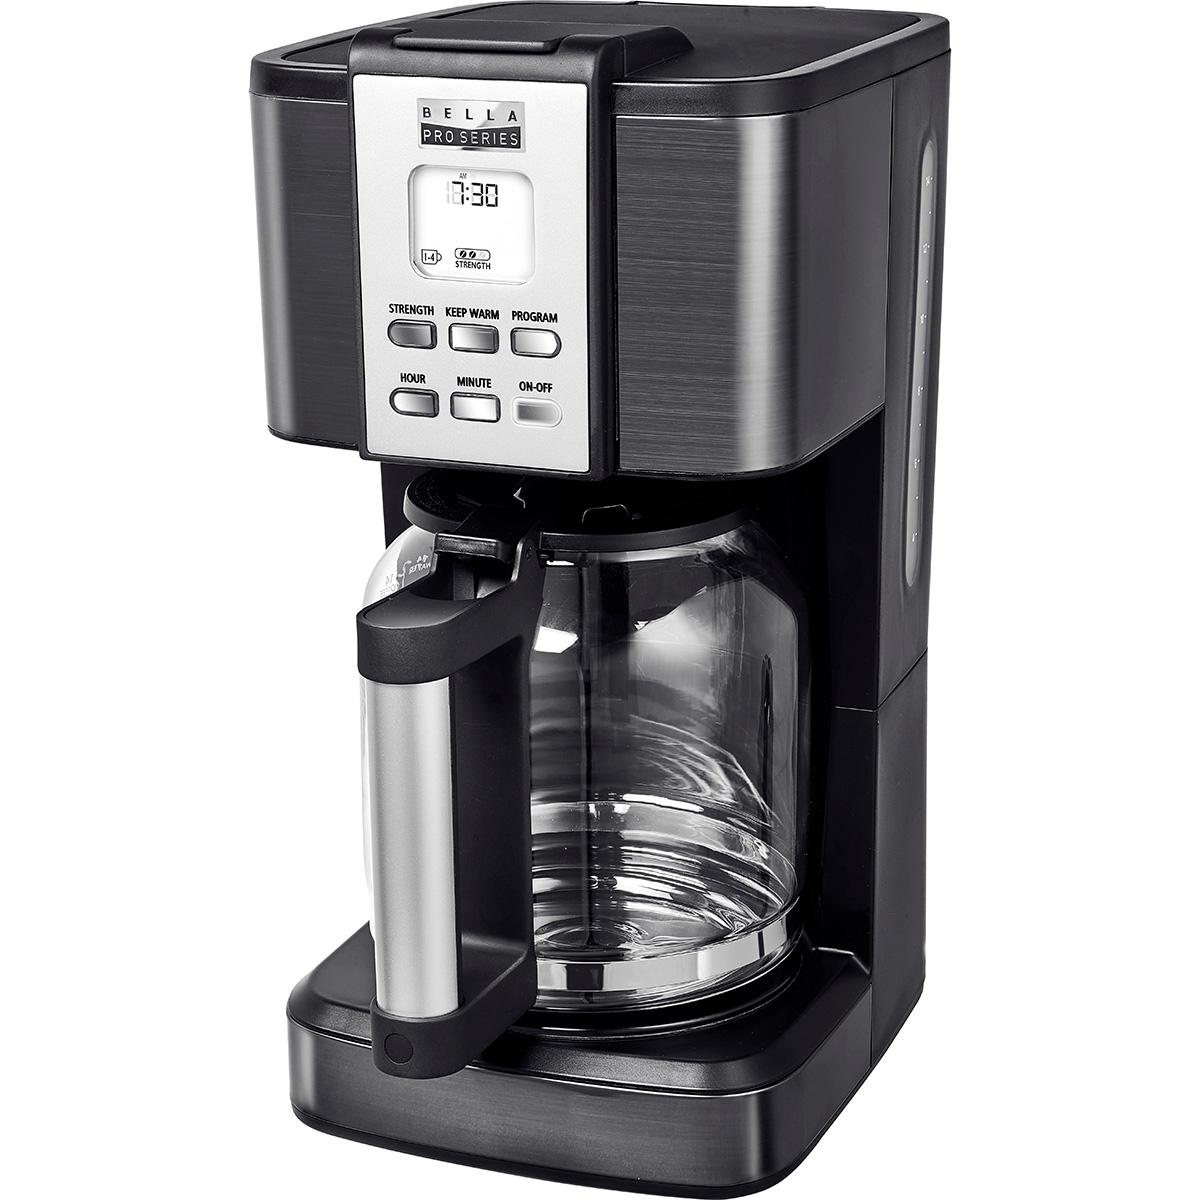 Bella Pro Series 14-Cup Coffee Maker for $29.99